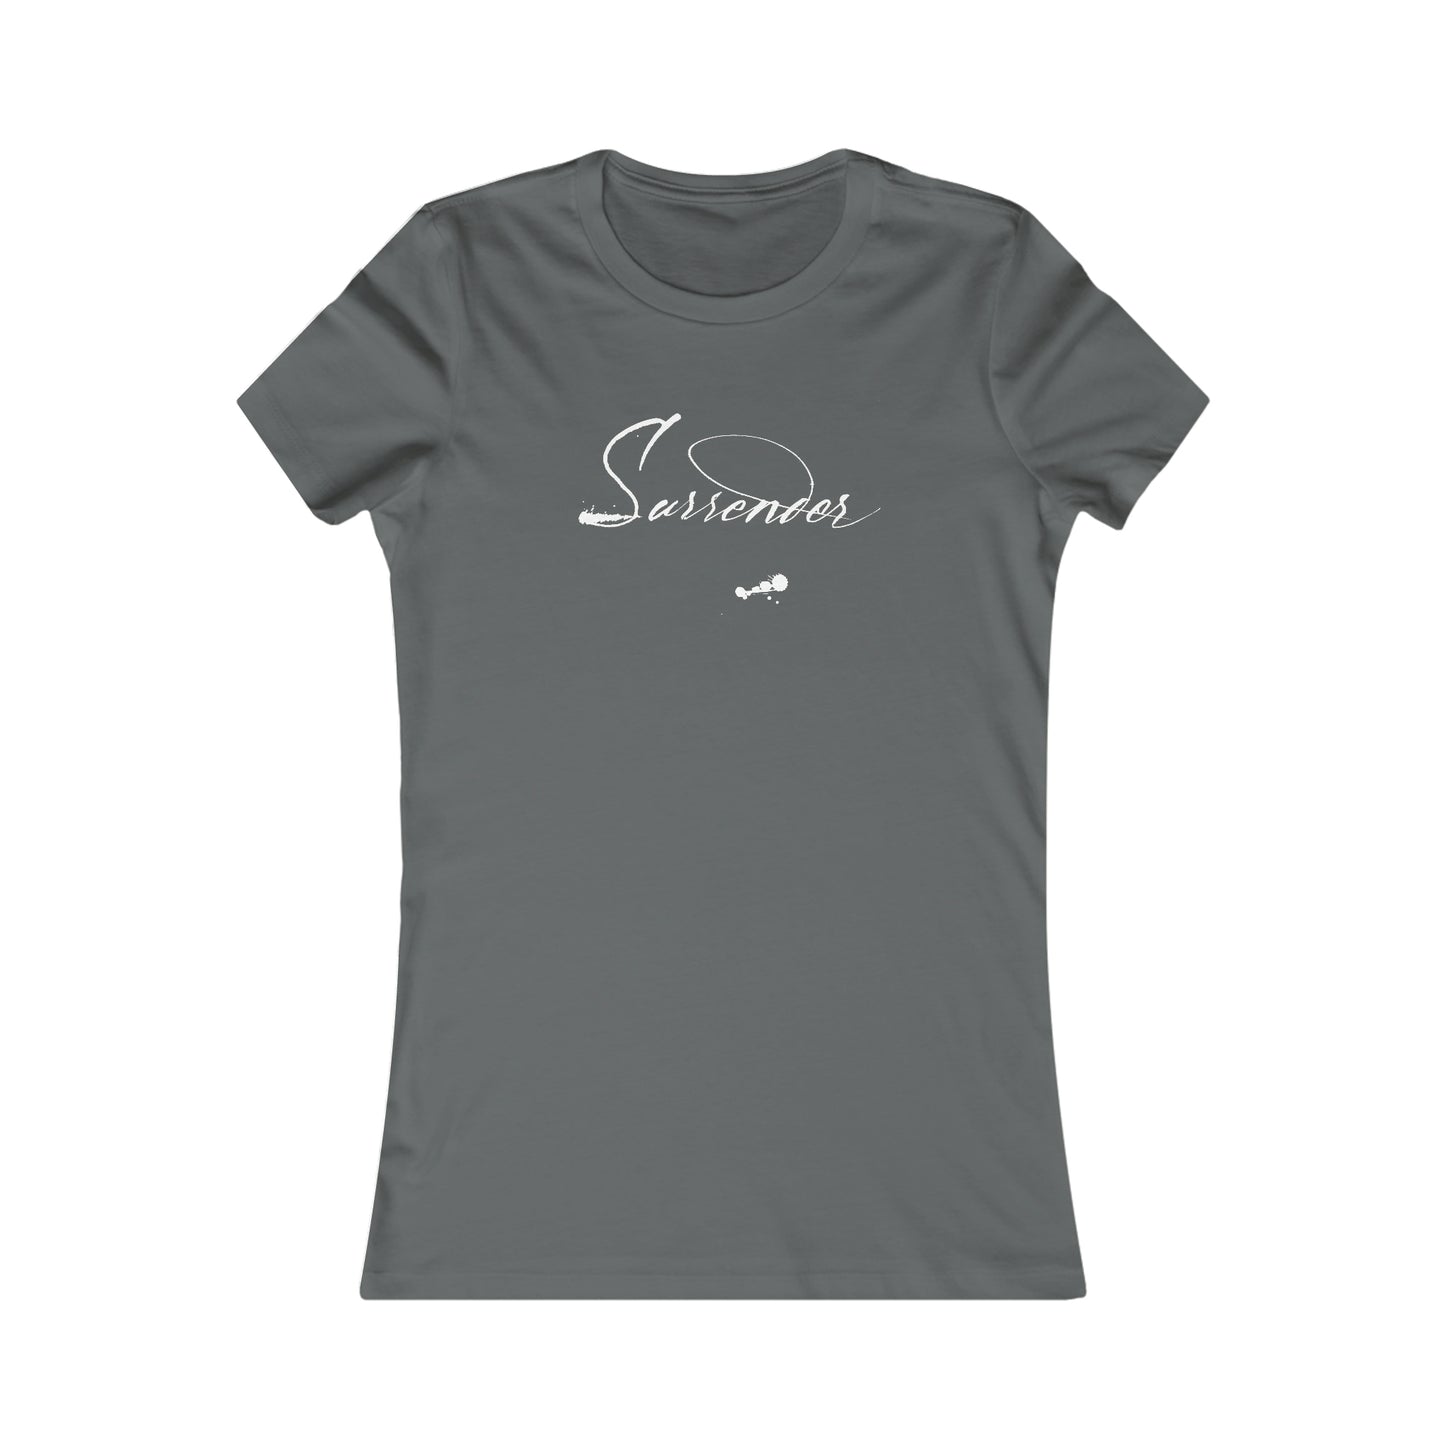 "Surrender" Mixed Messages Fitted T-Shirt